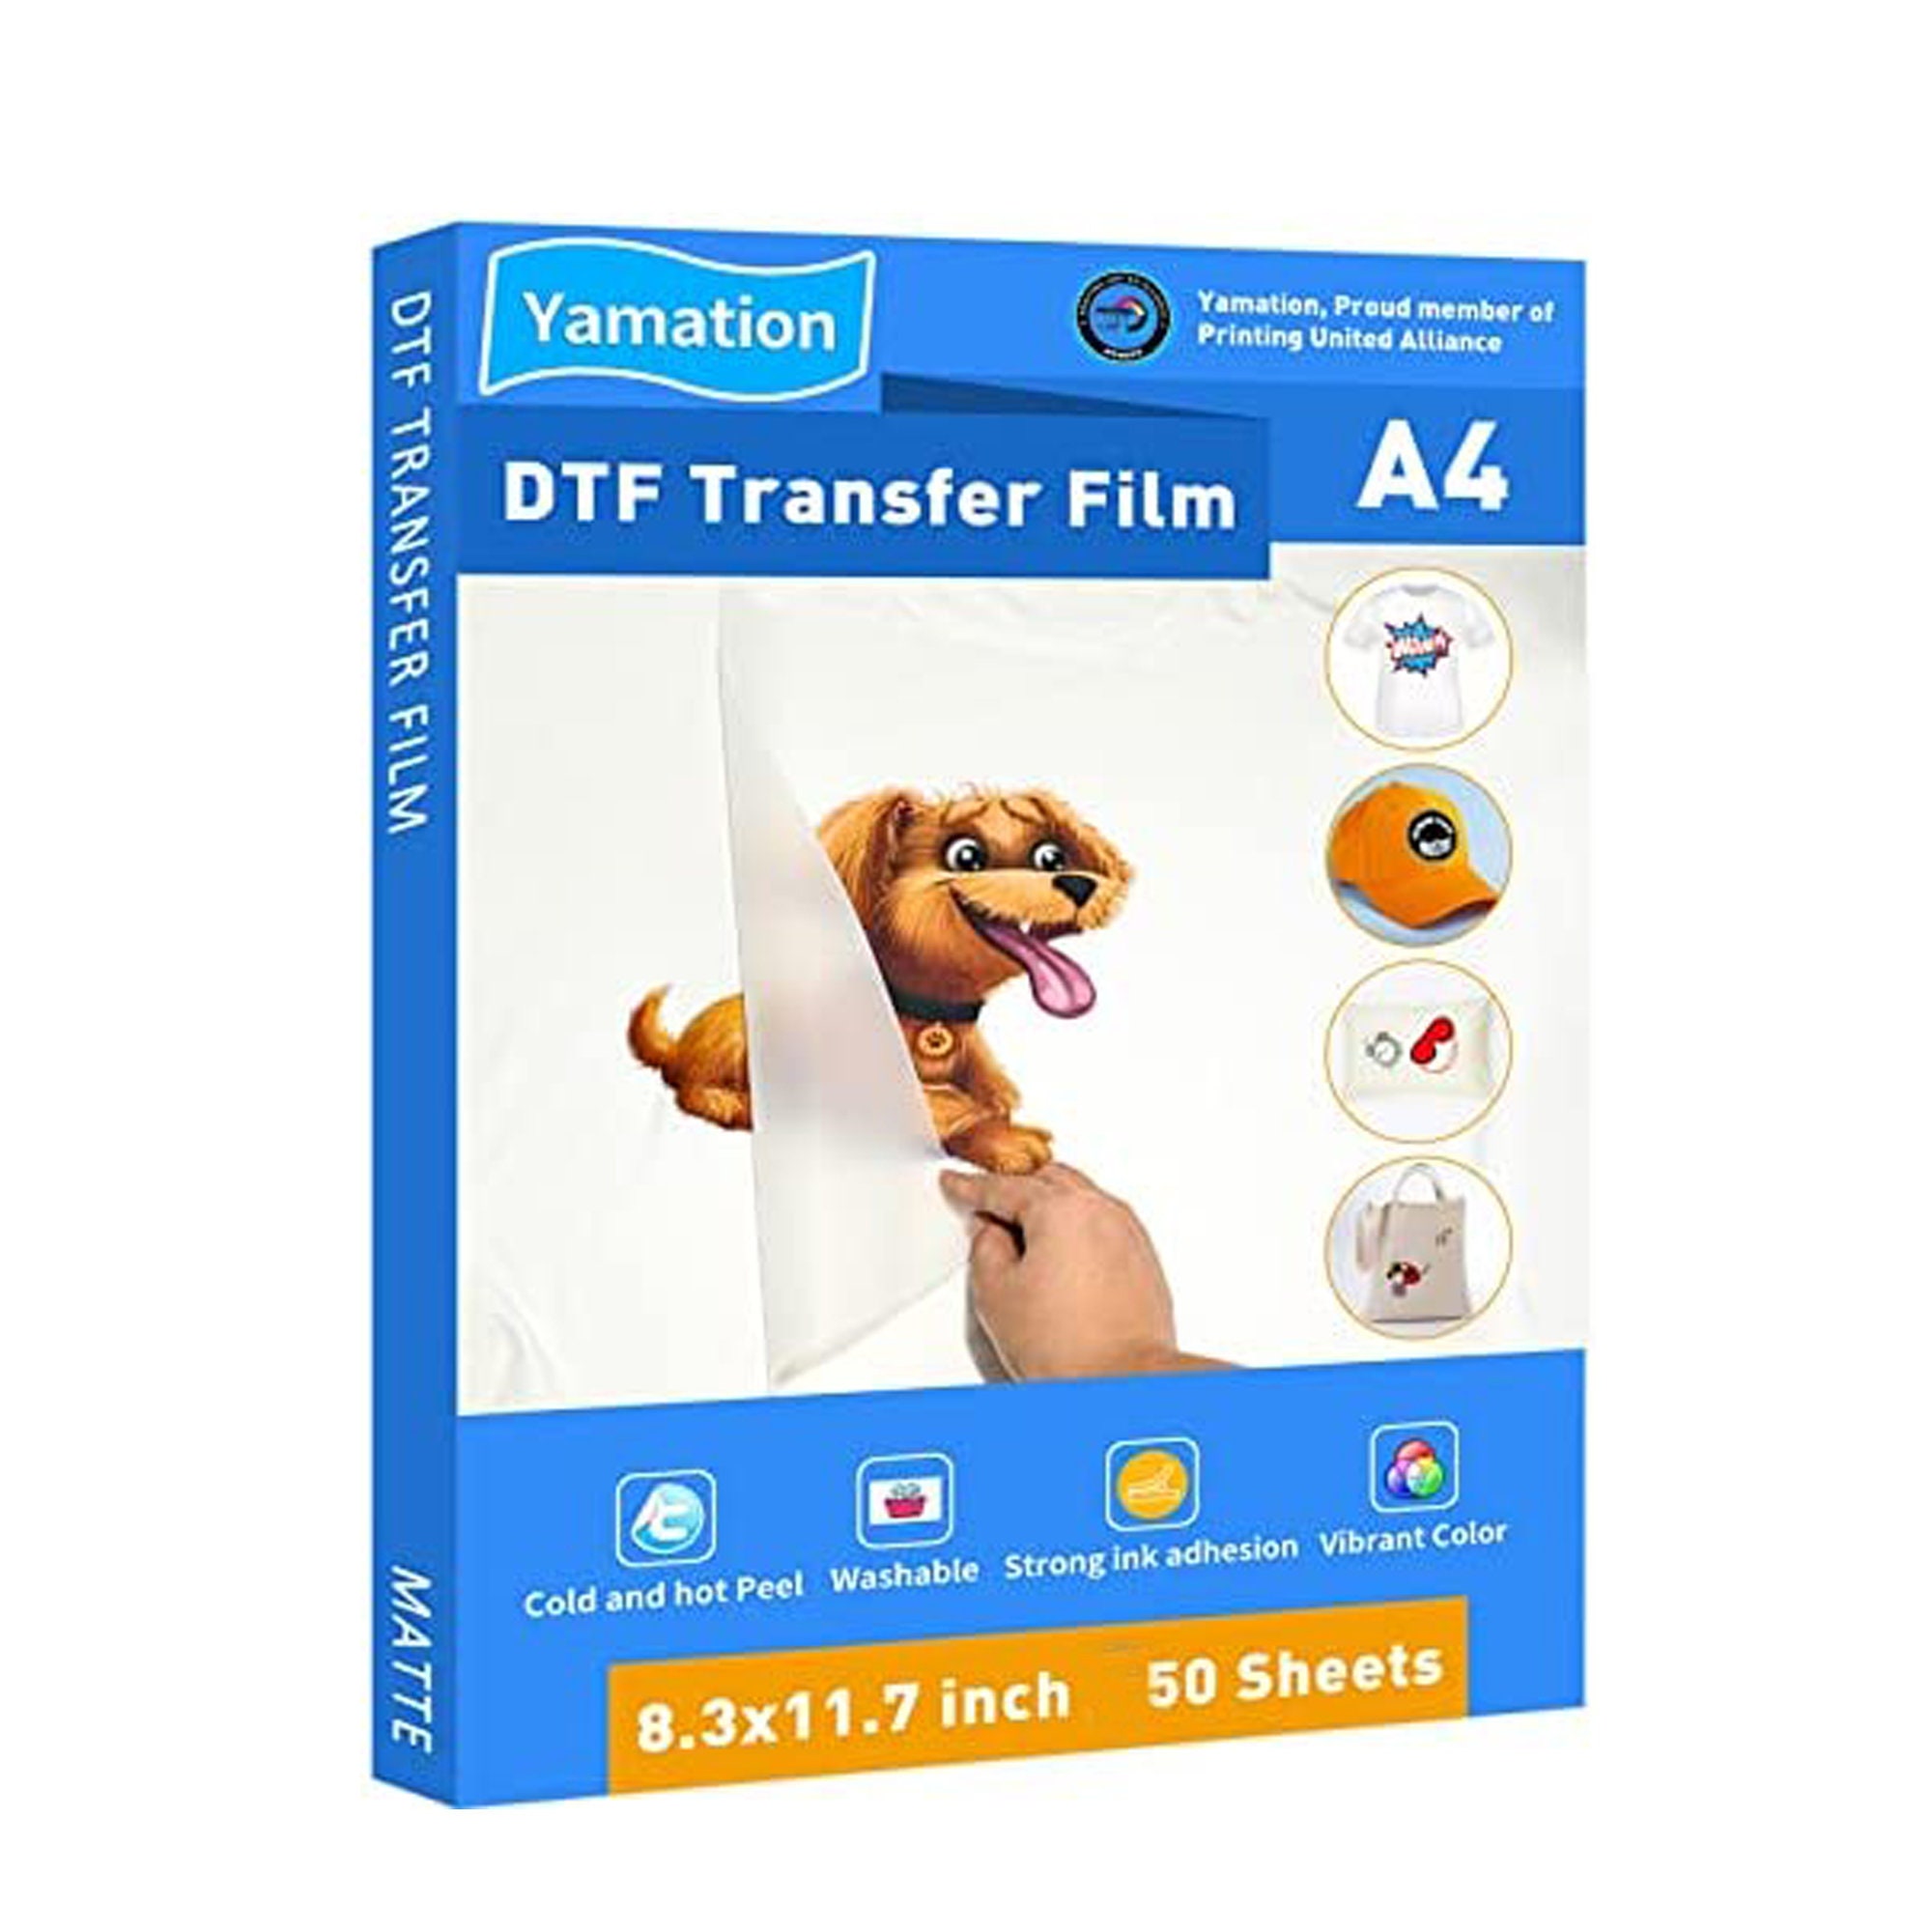 Yamation DTF Transfer Film Roll: 13inch Premium Double-sided Matte